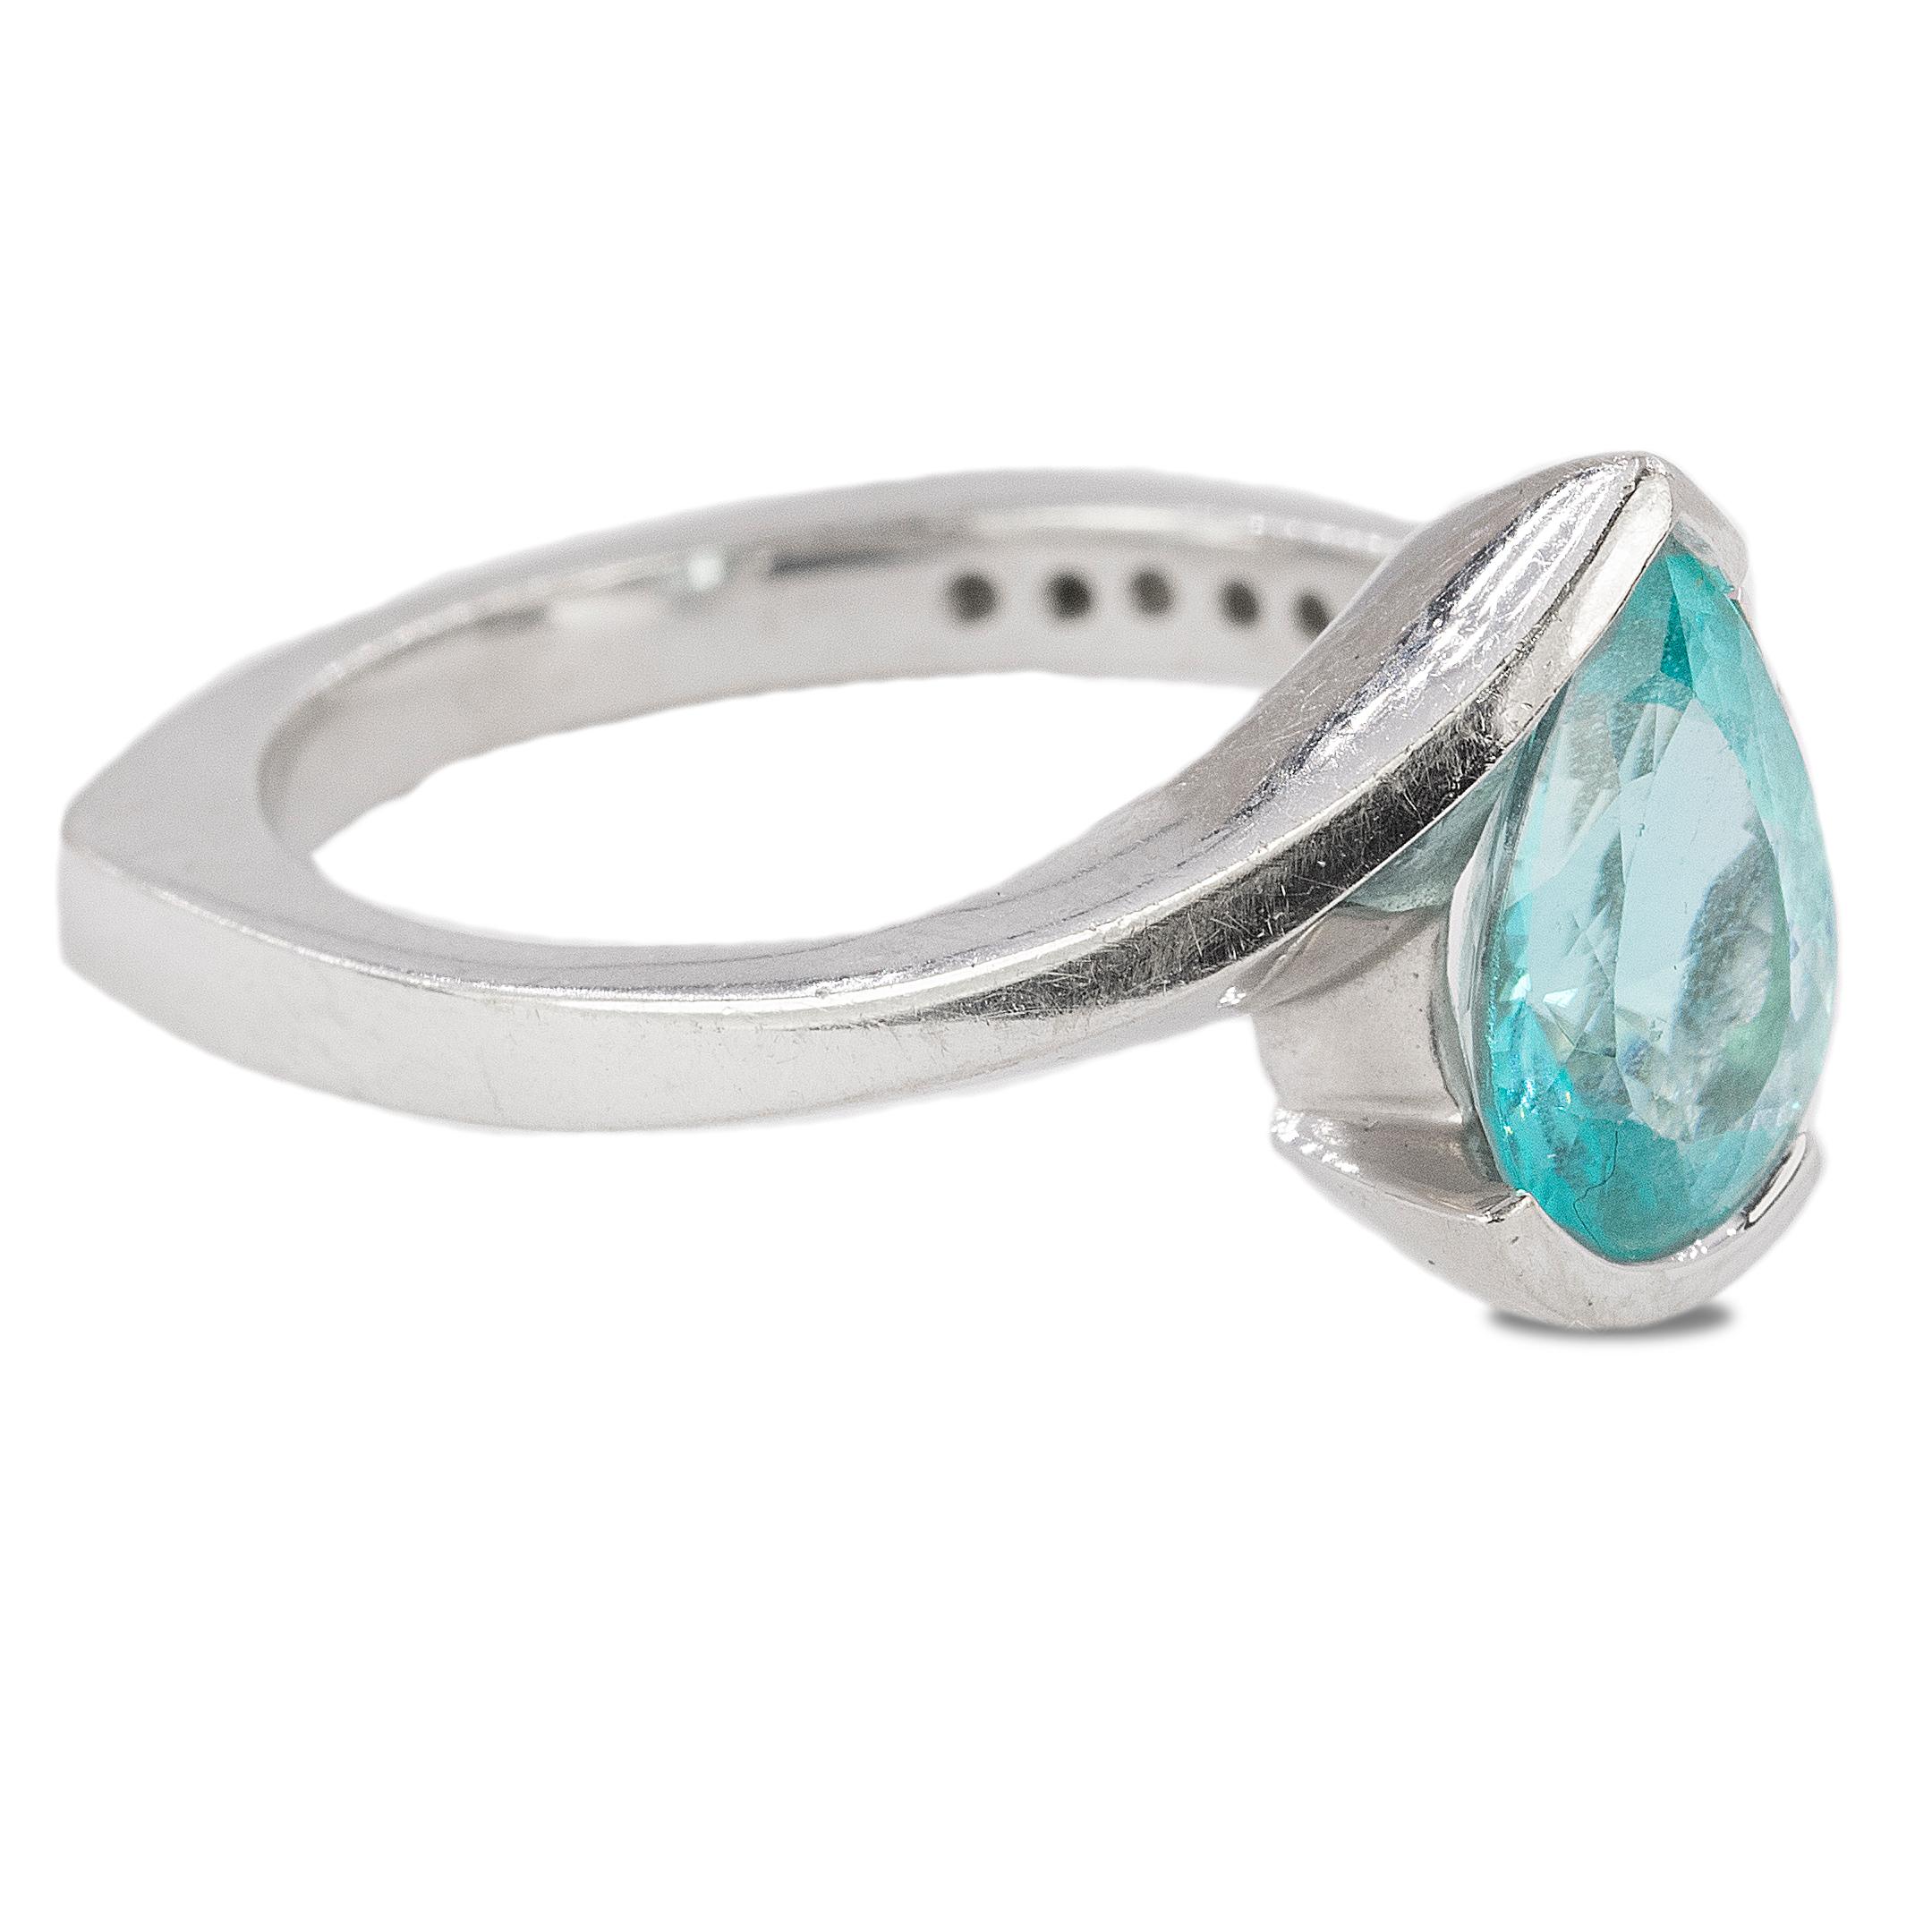 18k hand fabricated white gold ring with Gubelin certified 2.42 carat pear shape Paraiba Tourmaline measuring 11.82 s 7.99 x 4.91mm and approximately 0.40 carats of round brilliant diamonds.  